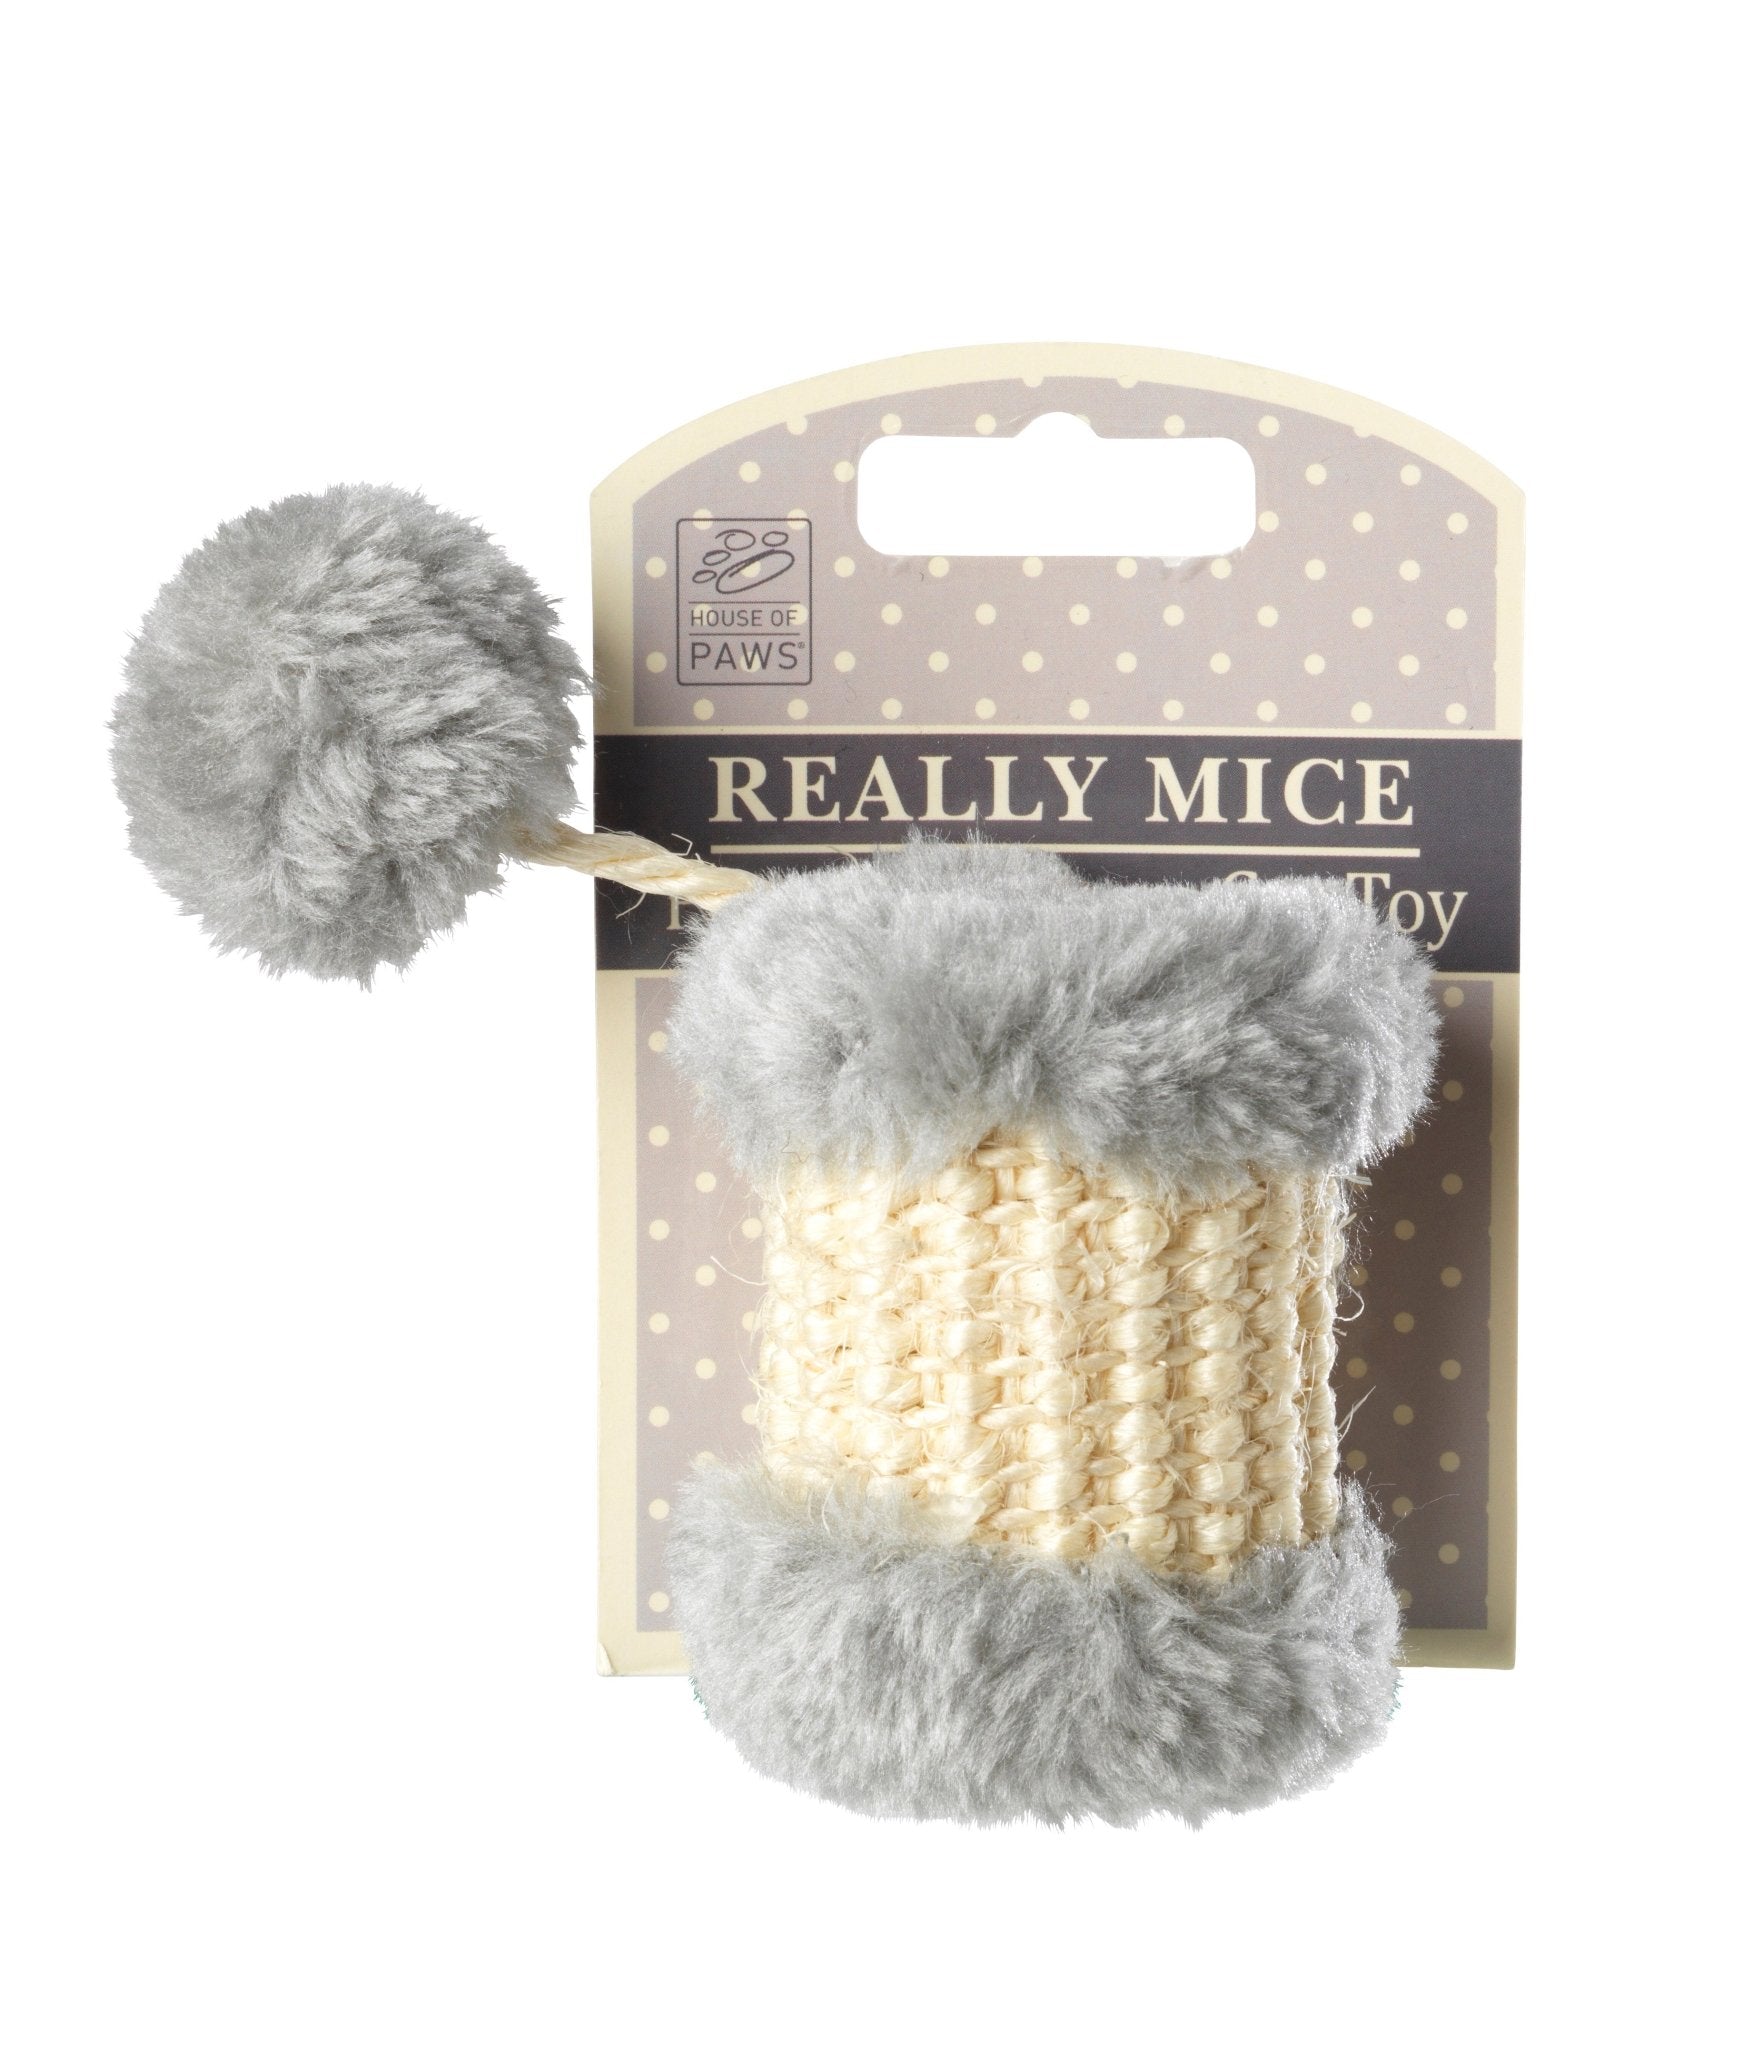 House of Paws Really Mice Pom Pom Drum Cat Toy x 4, House of Paws,